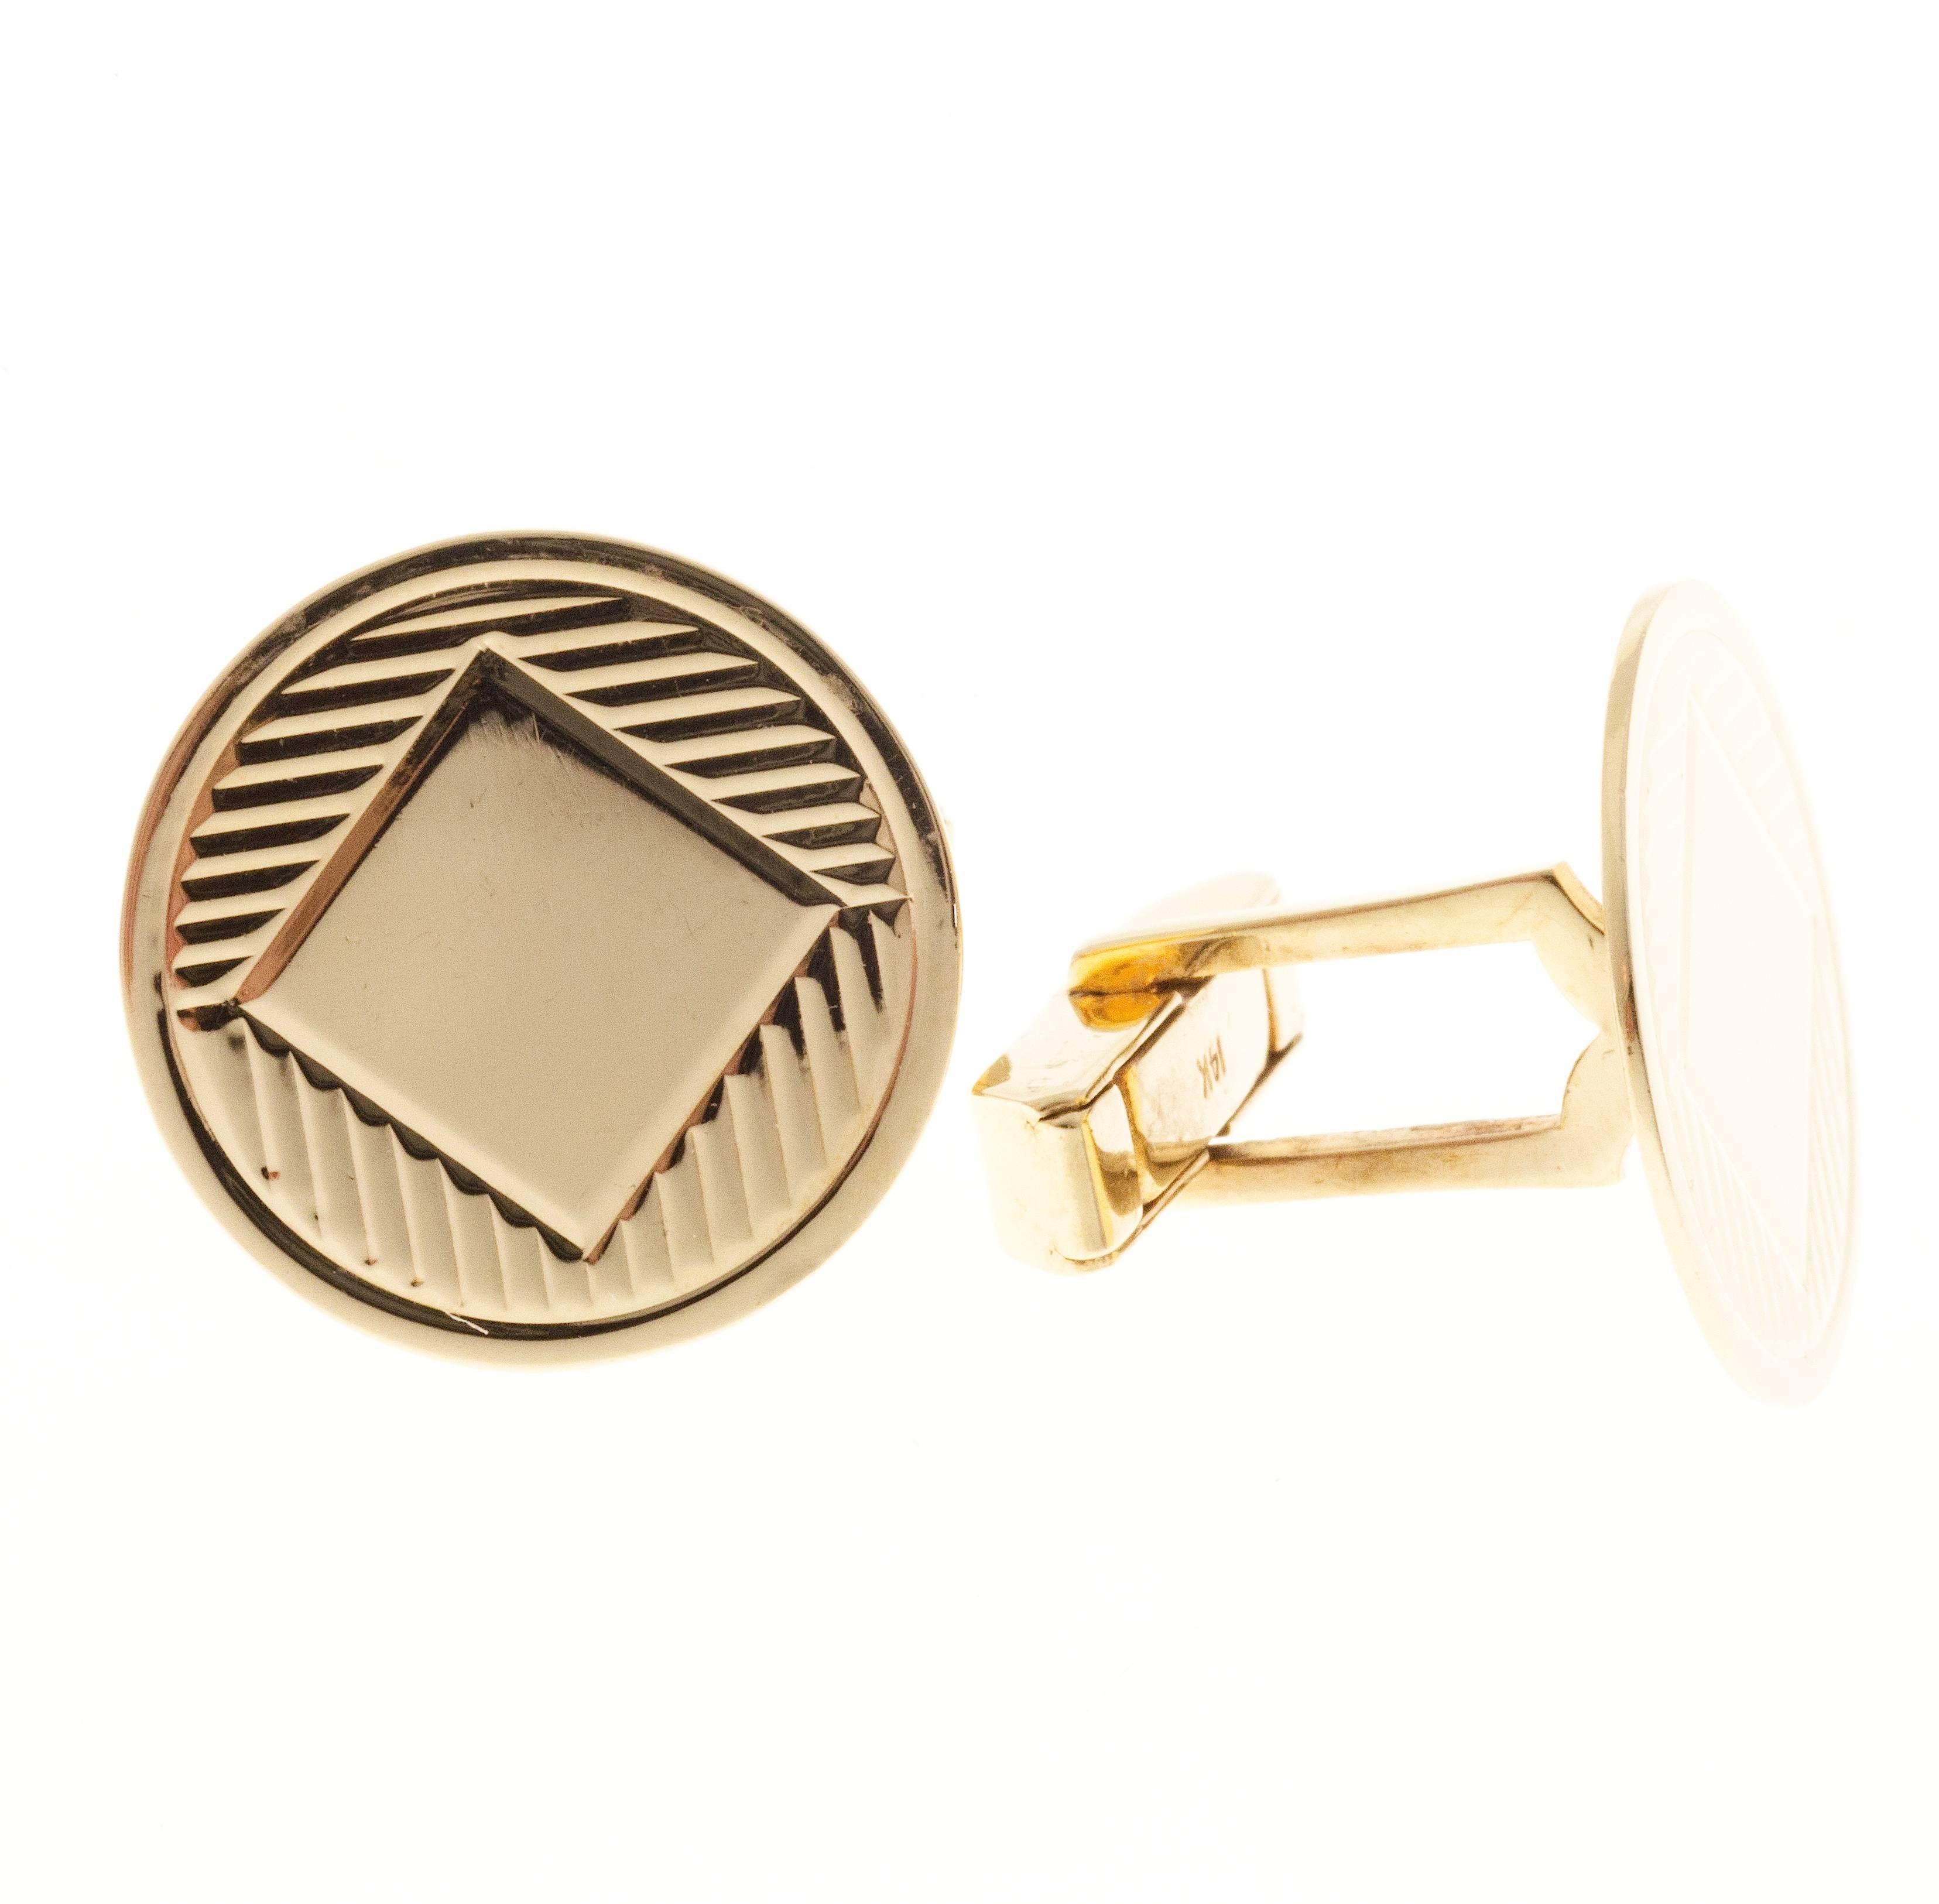  Gold Textured Smooth Round Clip Back Cufflinks For Sale 1